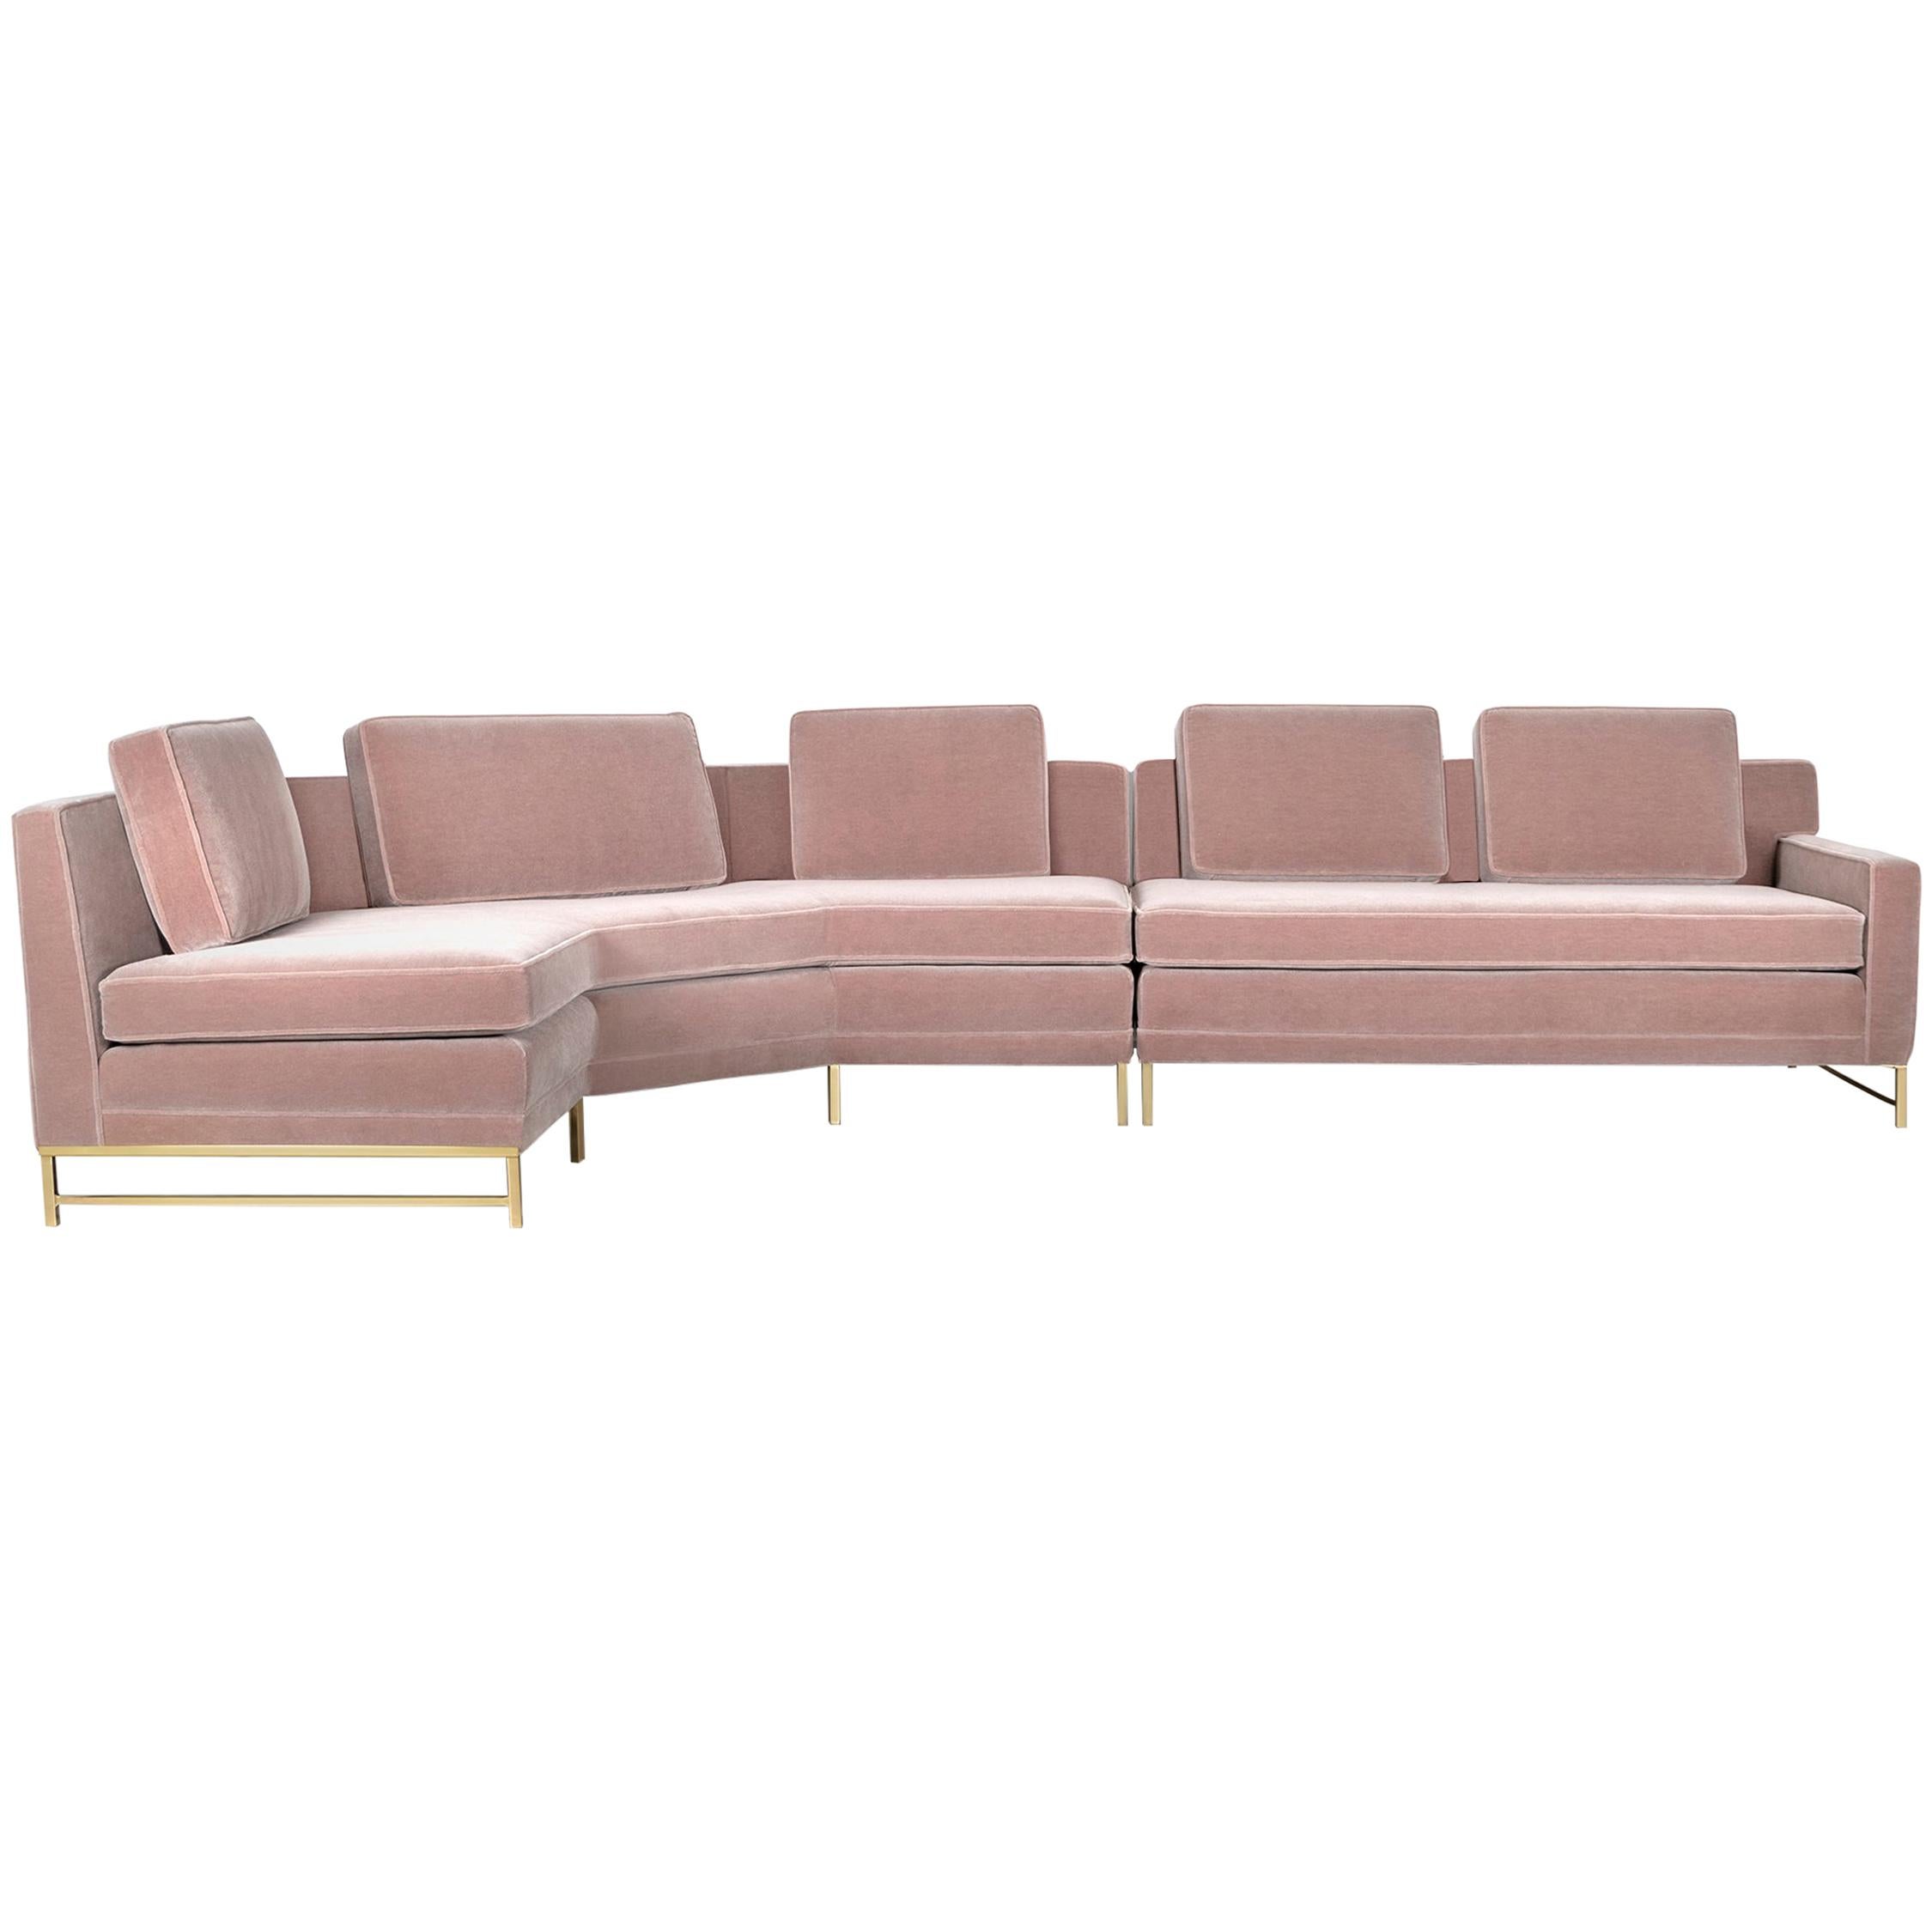 Paul McCobb for Directional Sectional Sofa For Sale